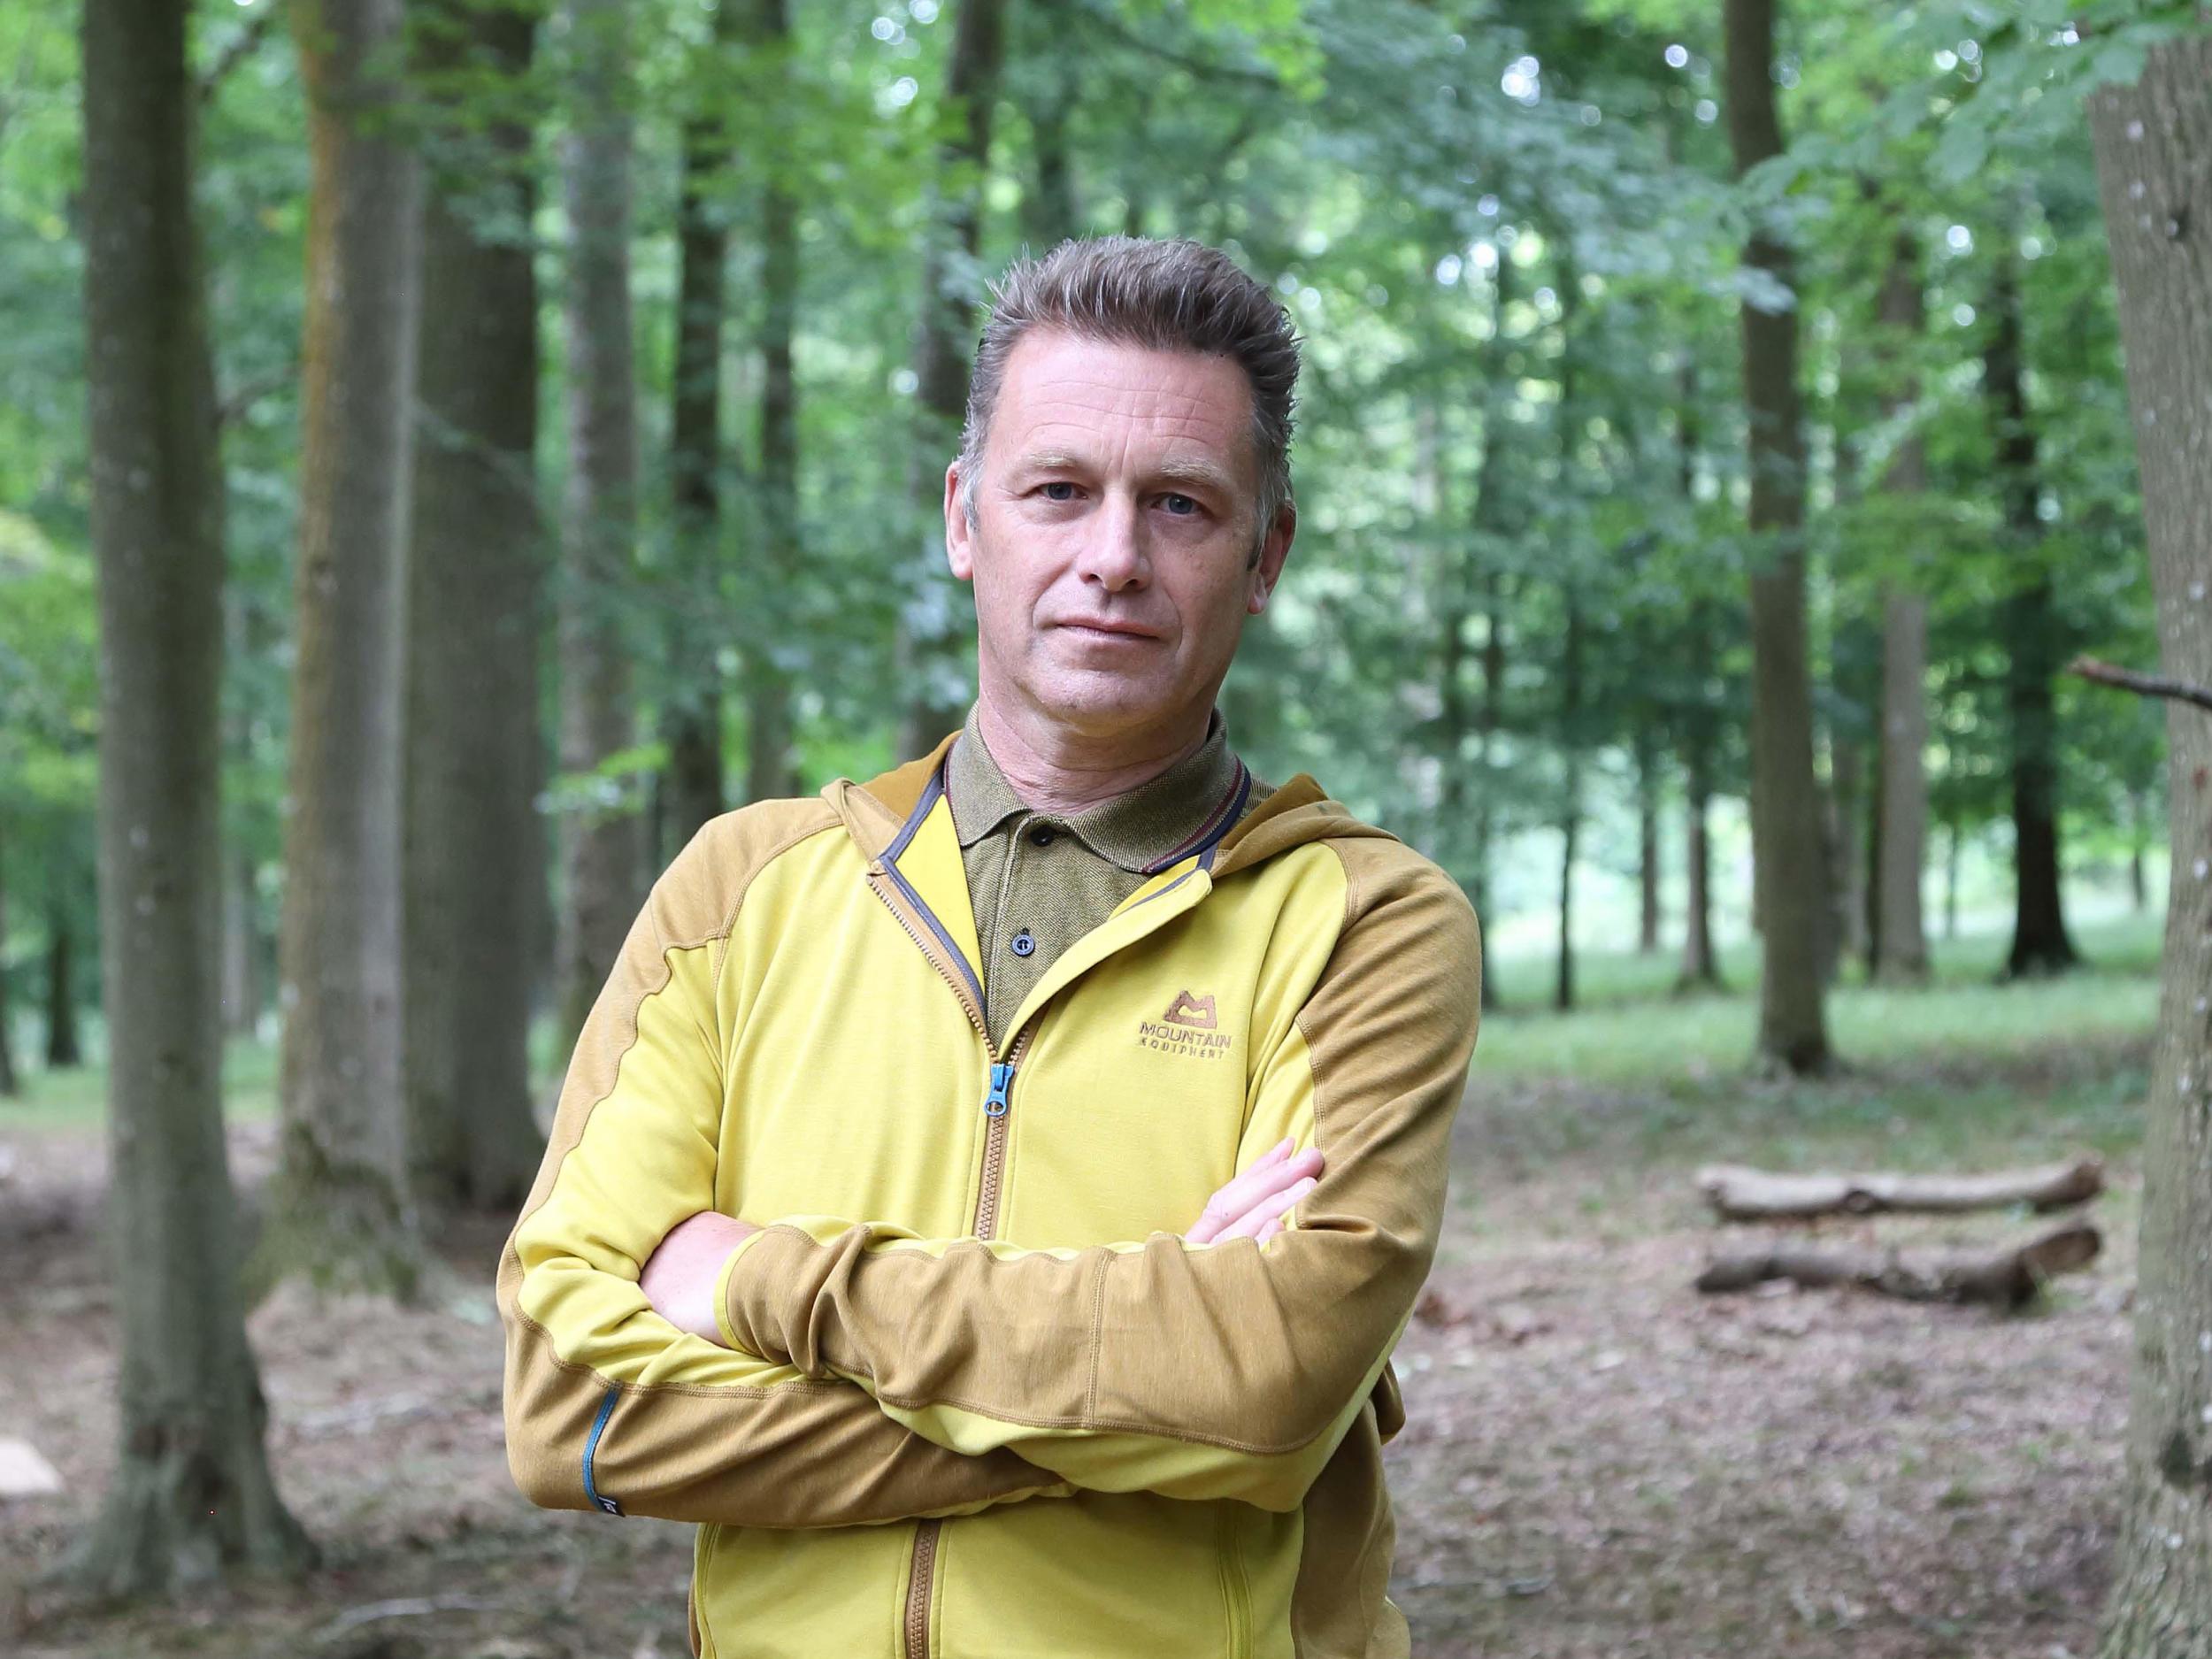 The Springwatch presenter says the UK has been reduced to a 'green and unpleasant land'